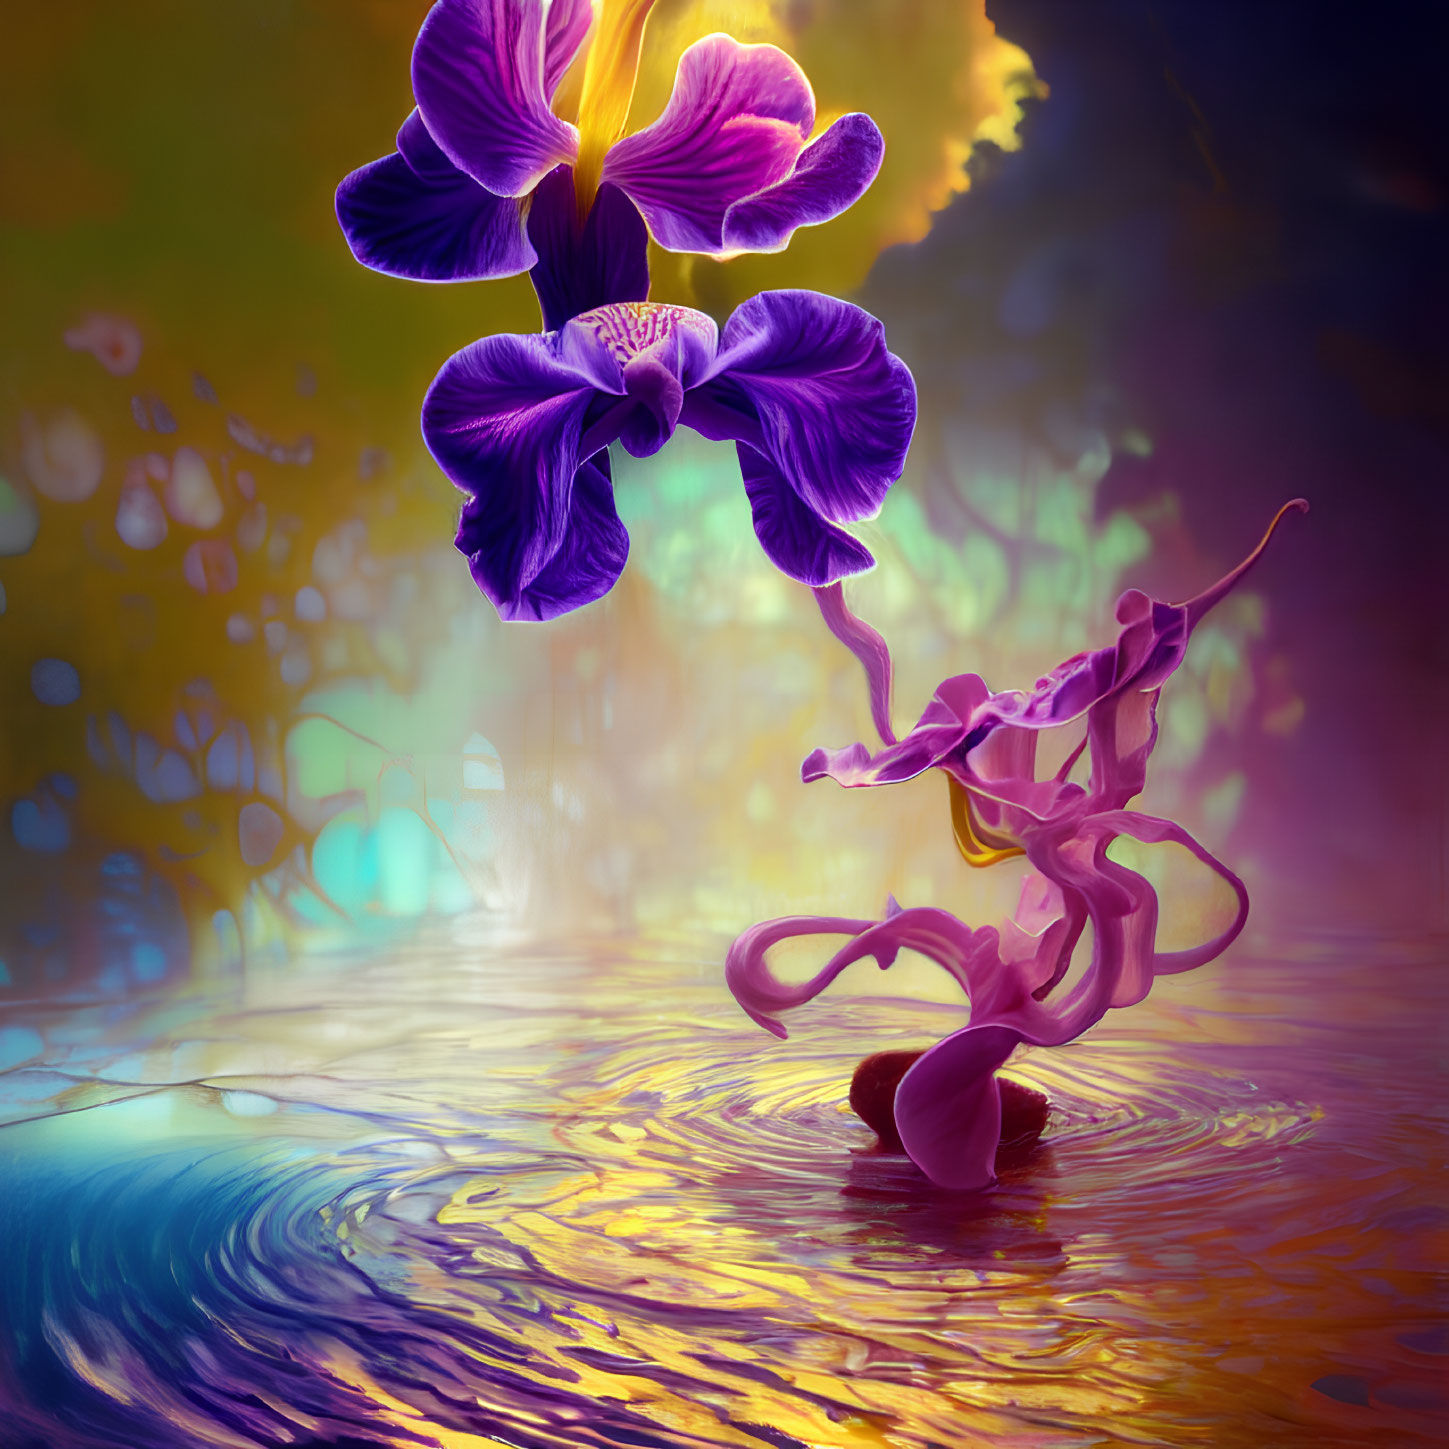 Colorful Iris Flower and Swirling Pink Figure in Surreal Scene